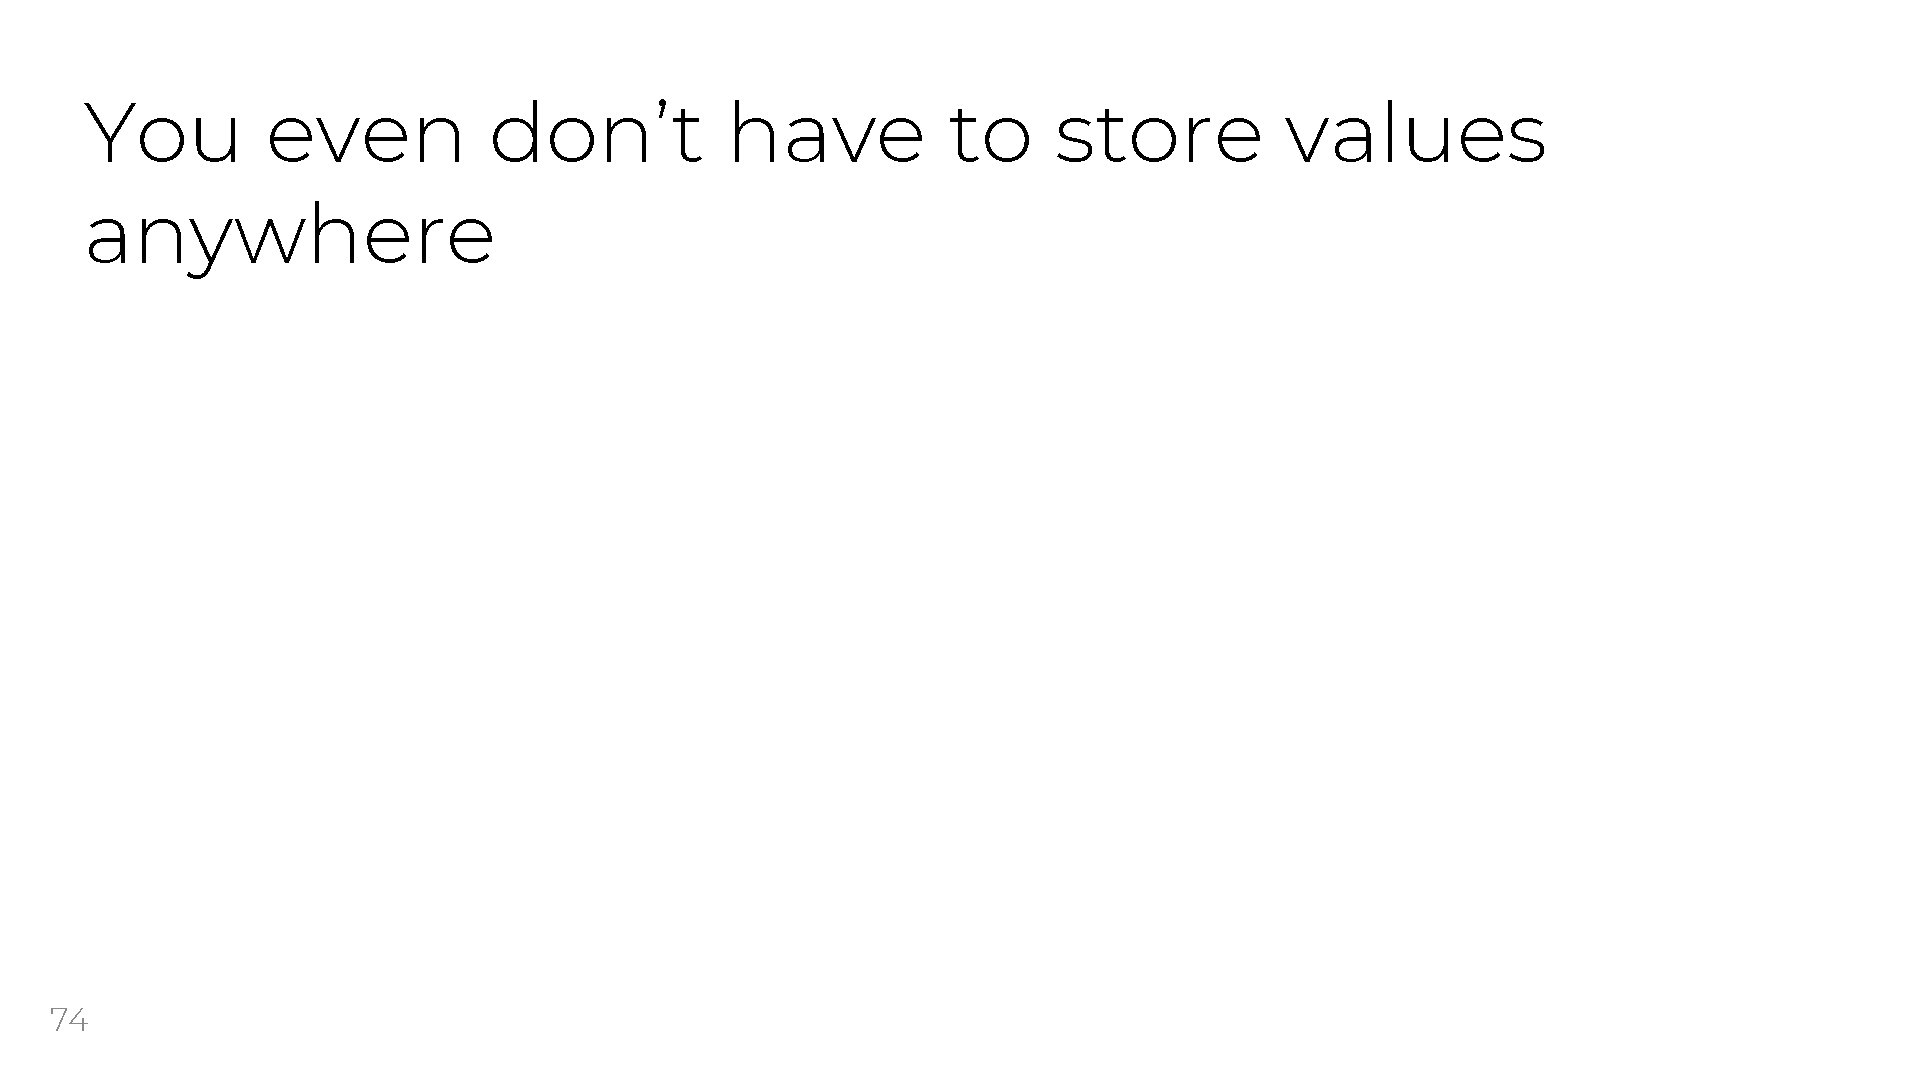 You even don’t have to store values anywhere 74 